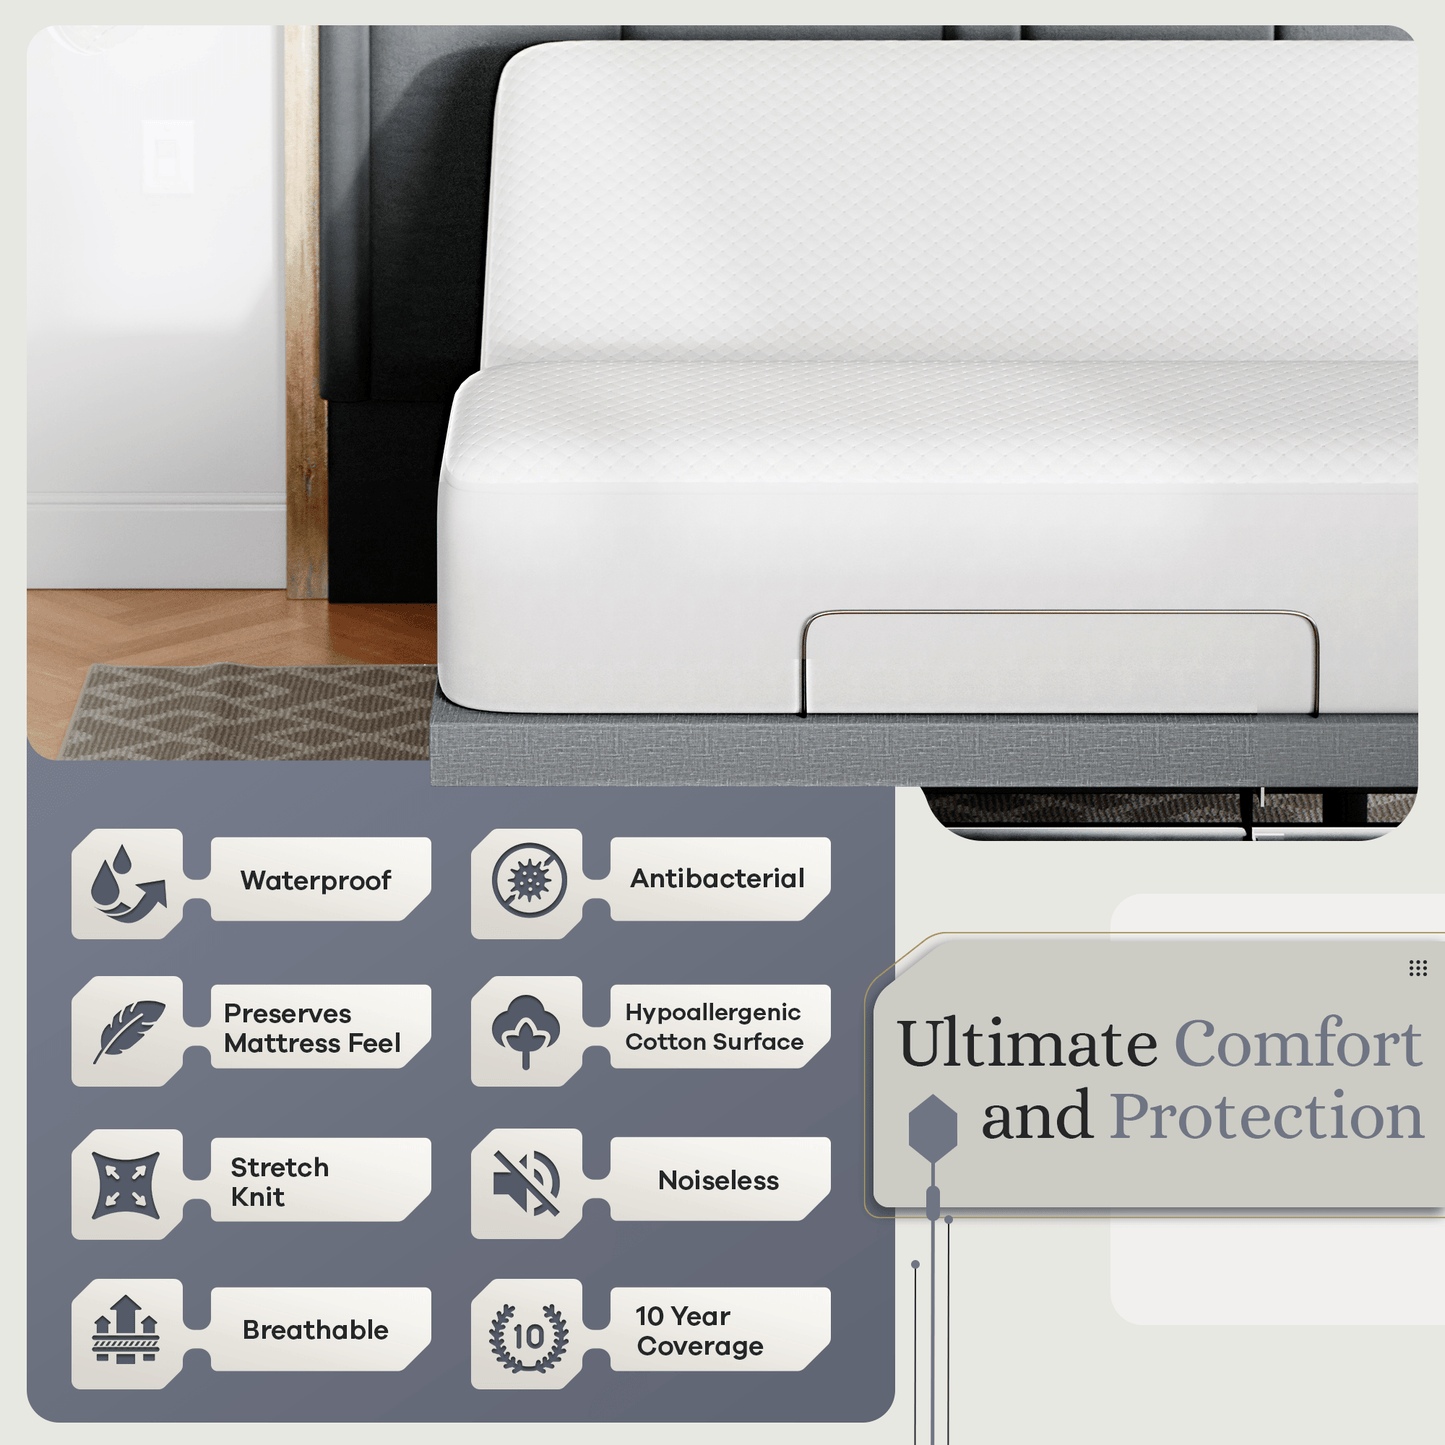 Premium Dimpled Stretch Knit Mattress Protector Bedding SVEN & SON® 